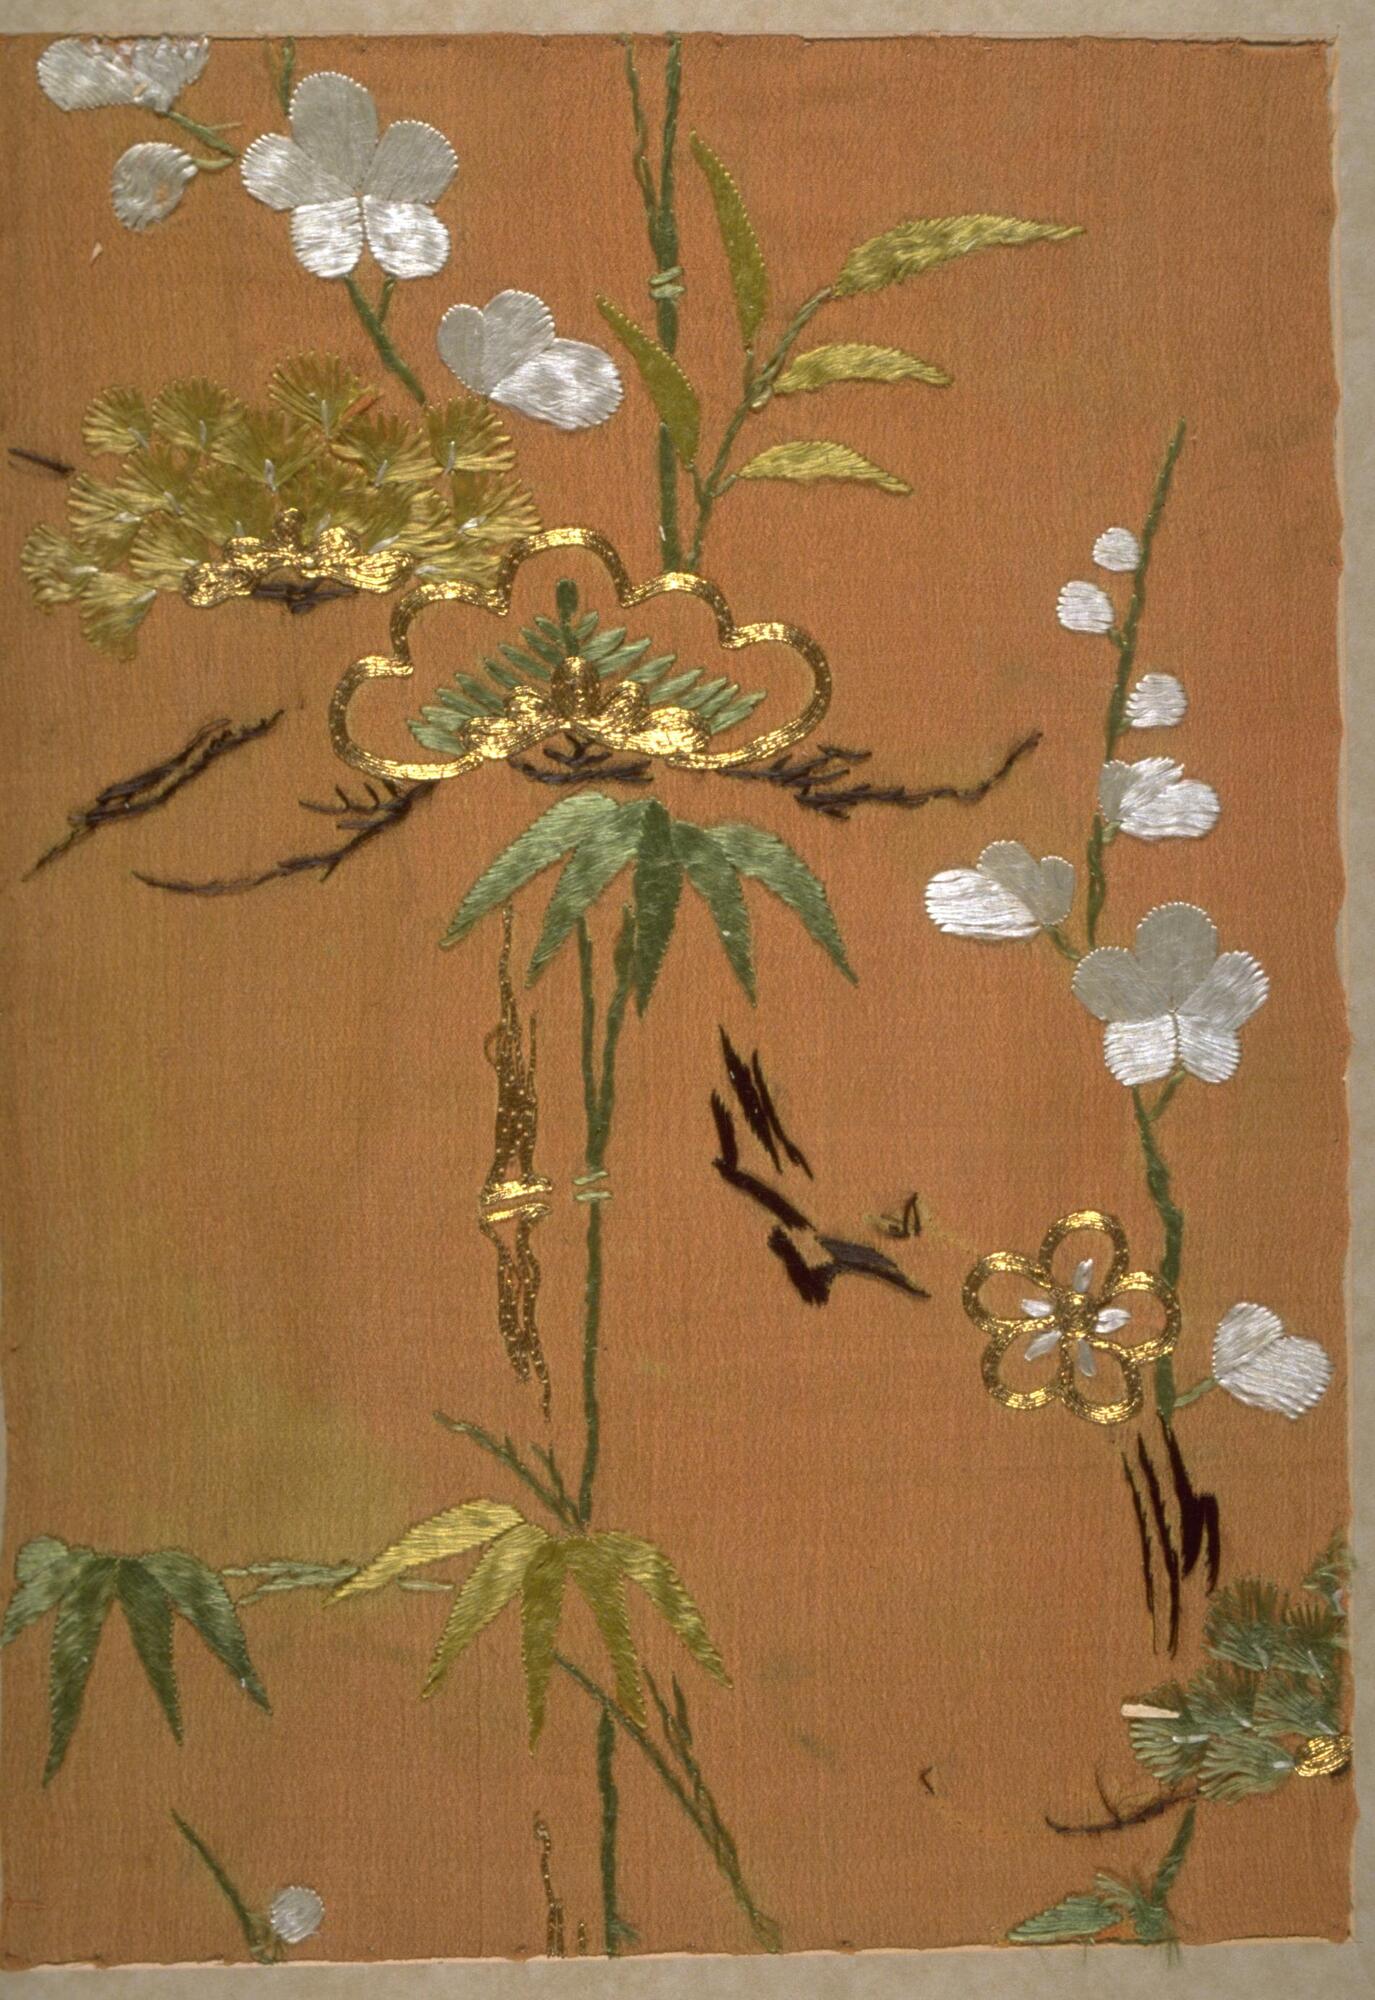 Kimono Fragment with an orange background that has green, gold, and white embroidered and couched designs of plum, bamboo and pine.